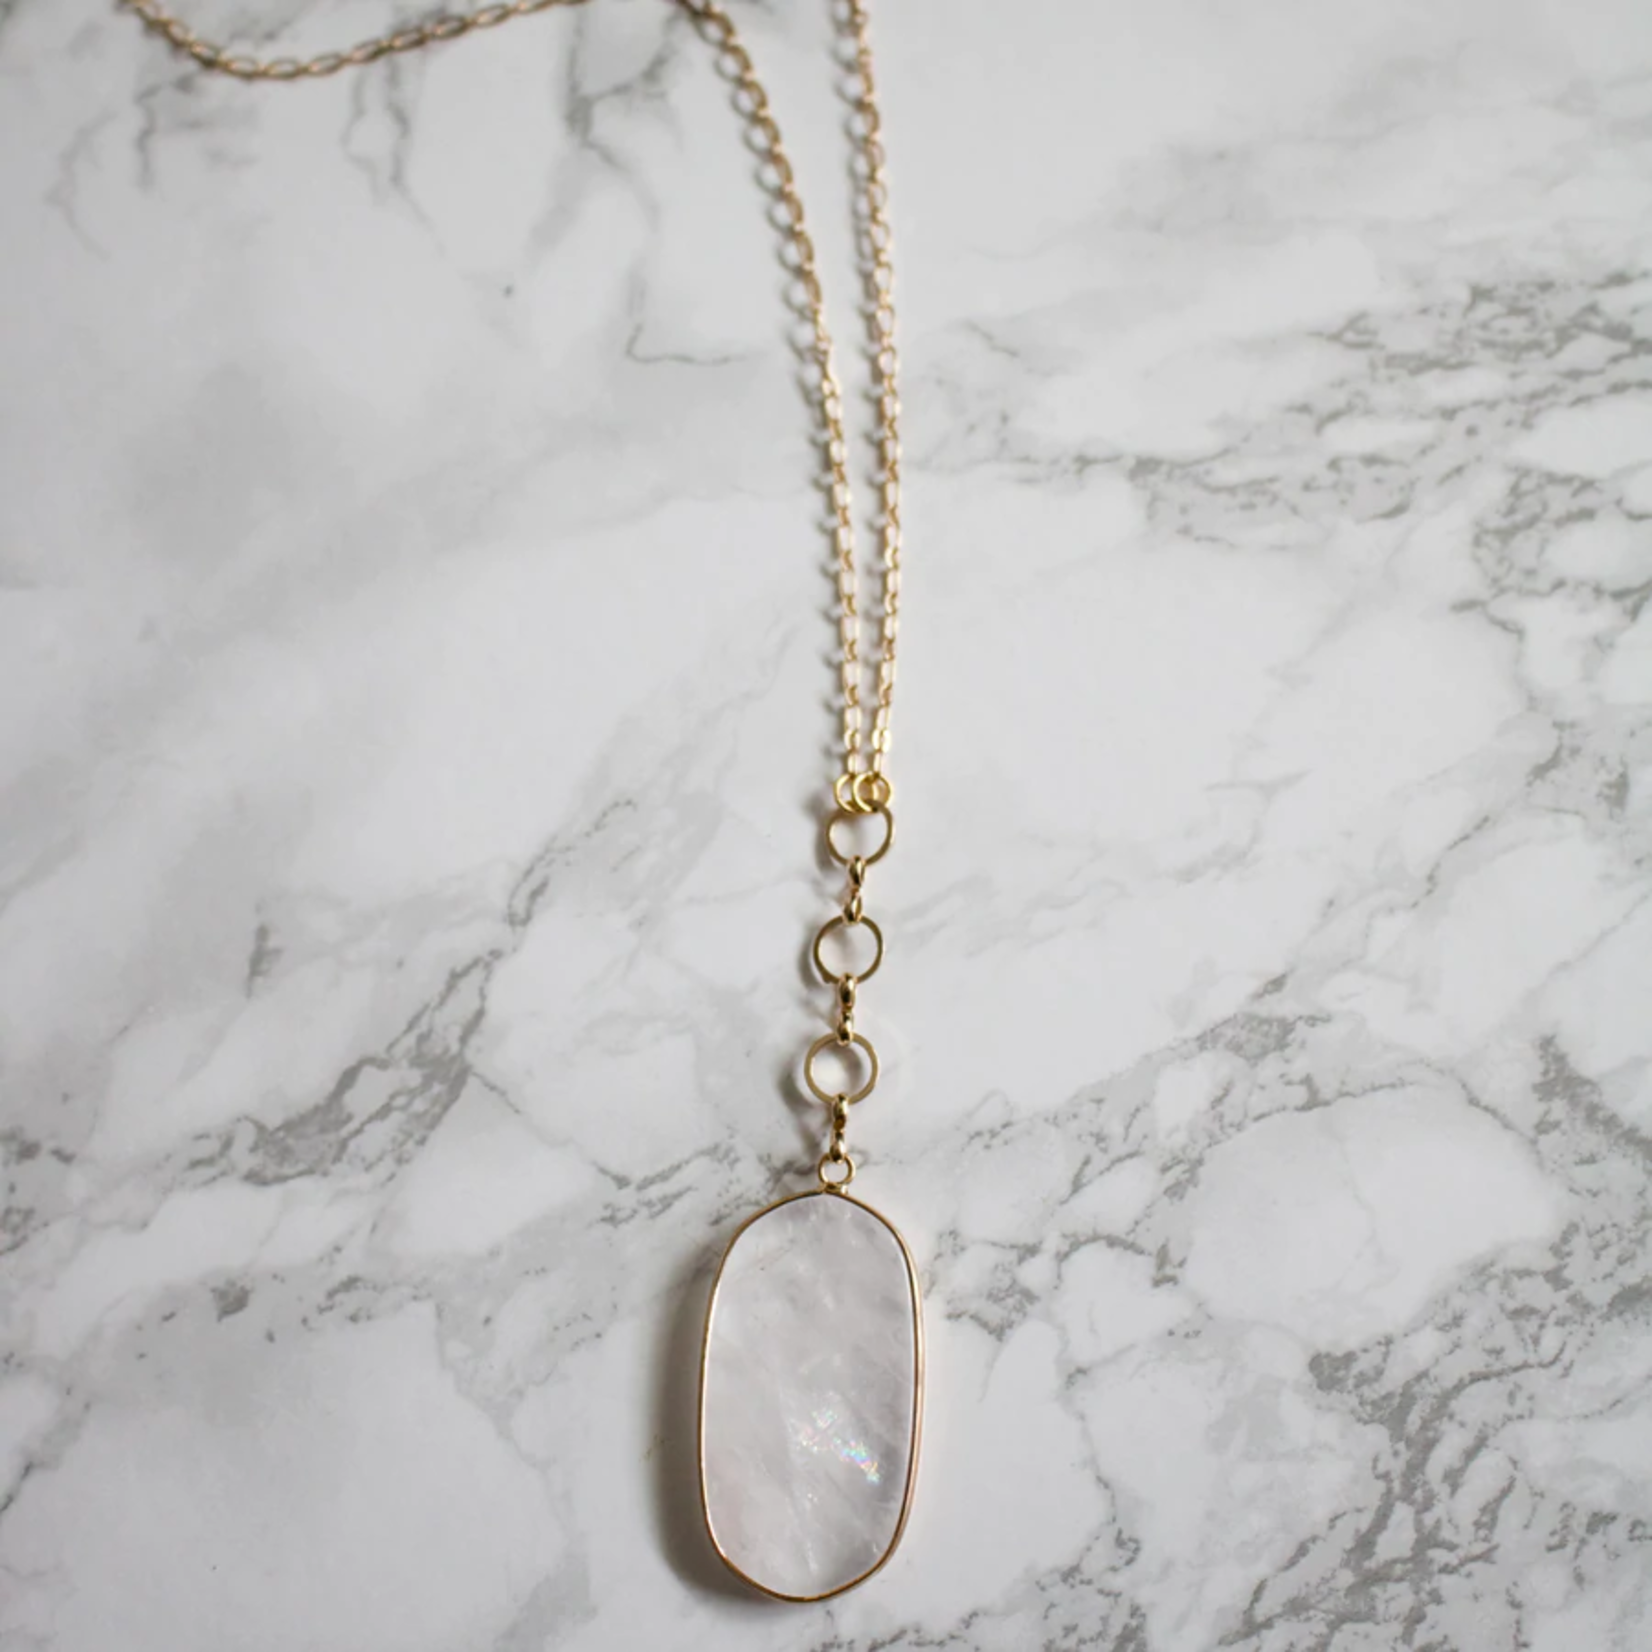 Tish Jewelry Necklace Gold w Clear Quartz Oval Pendant